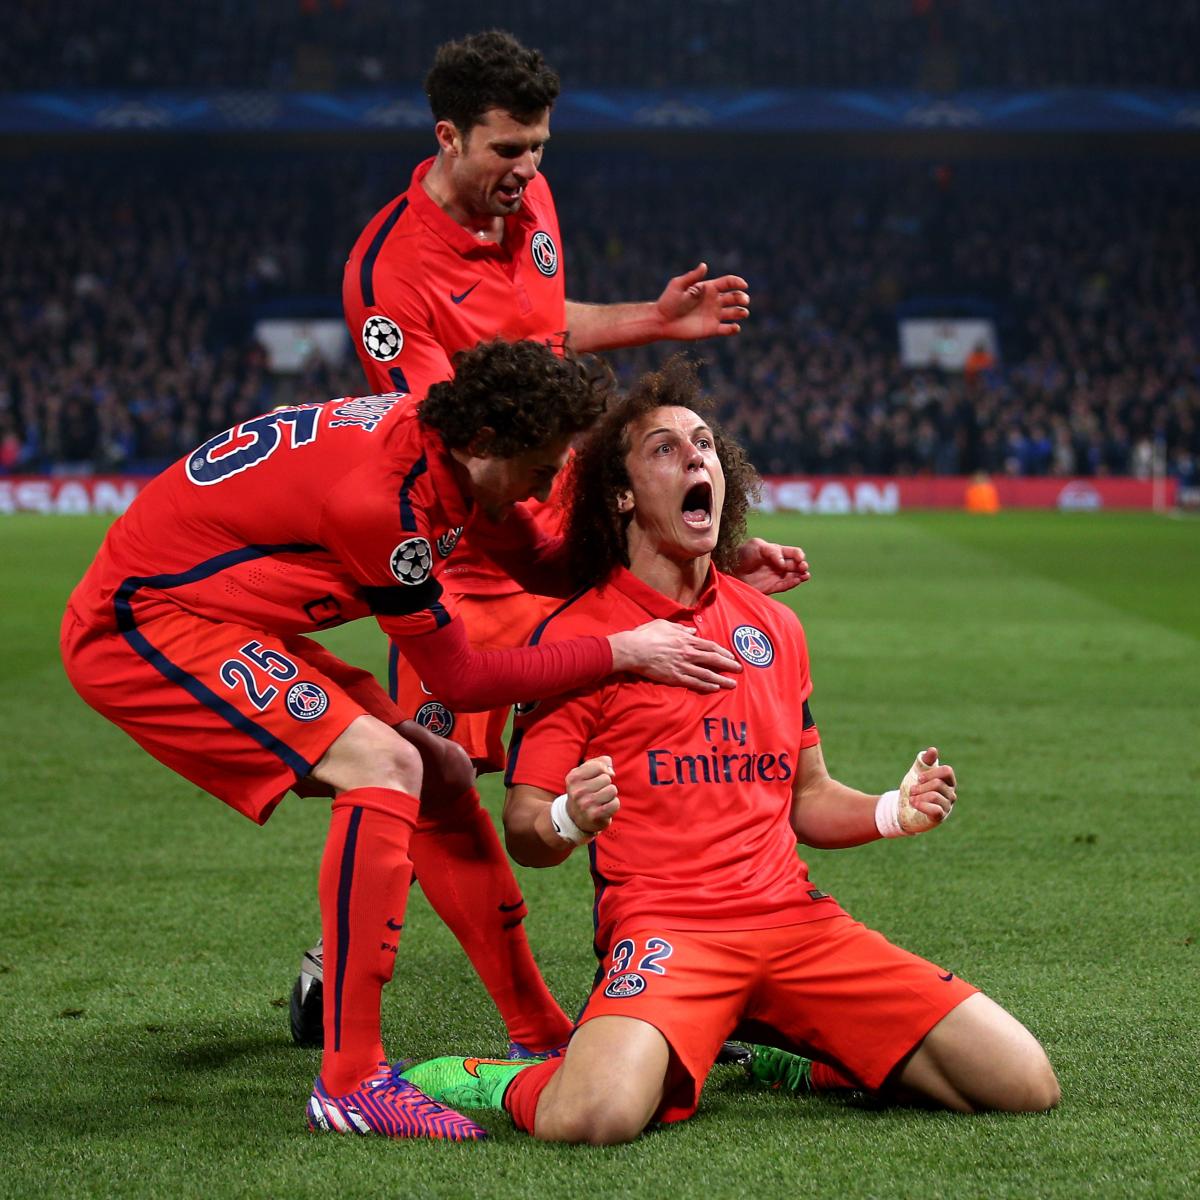 PSG Finally Prove Champions League Credentials After Knocking out